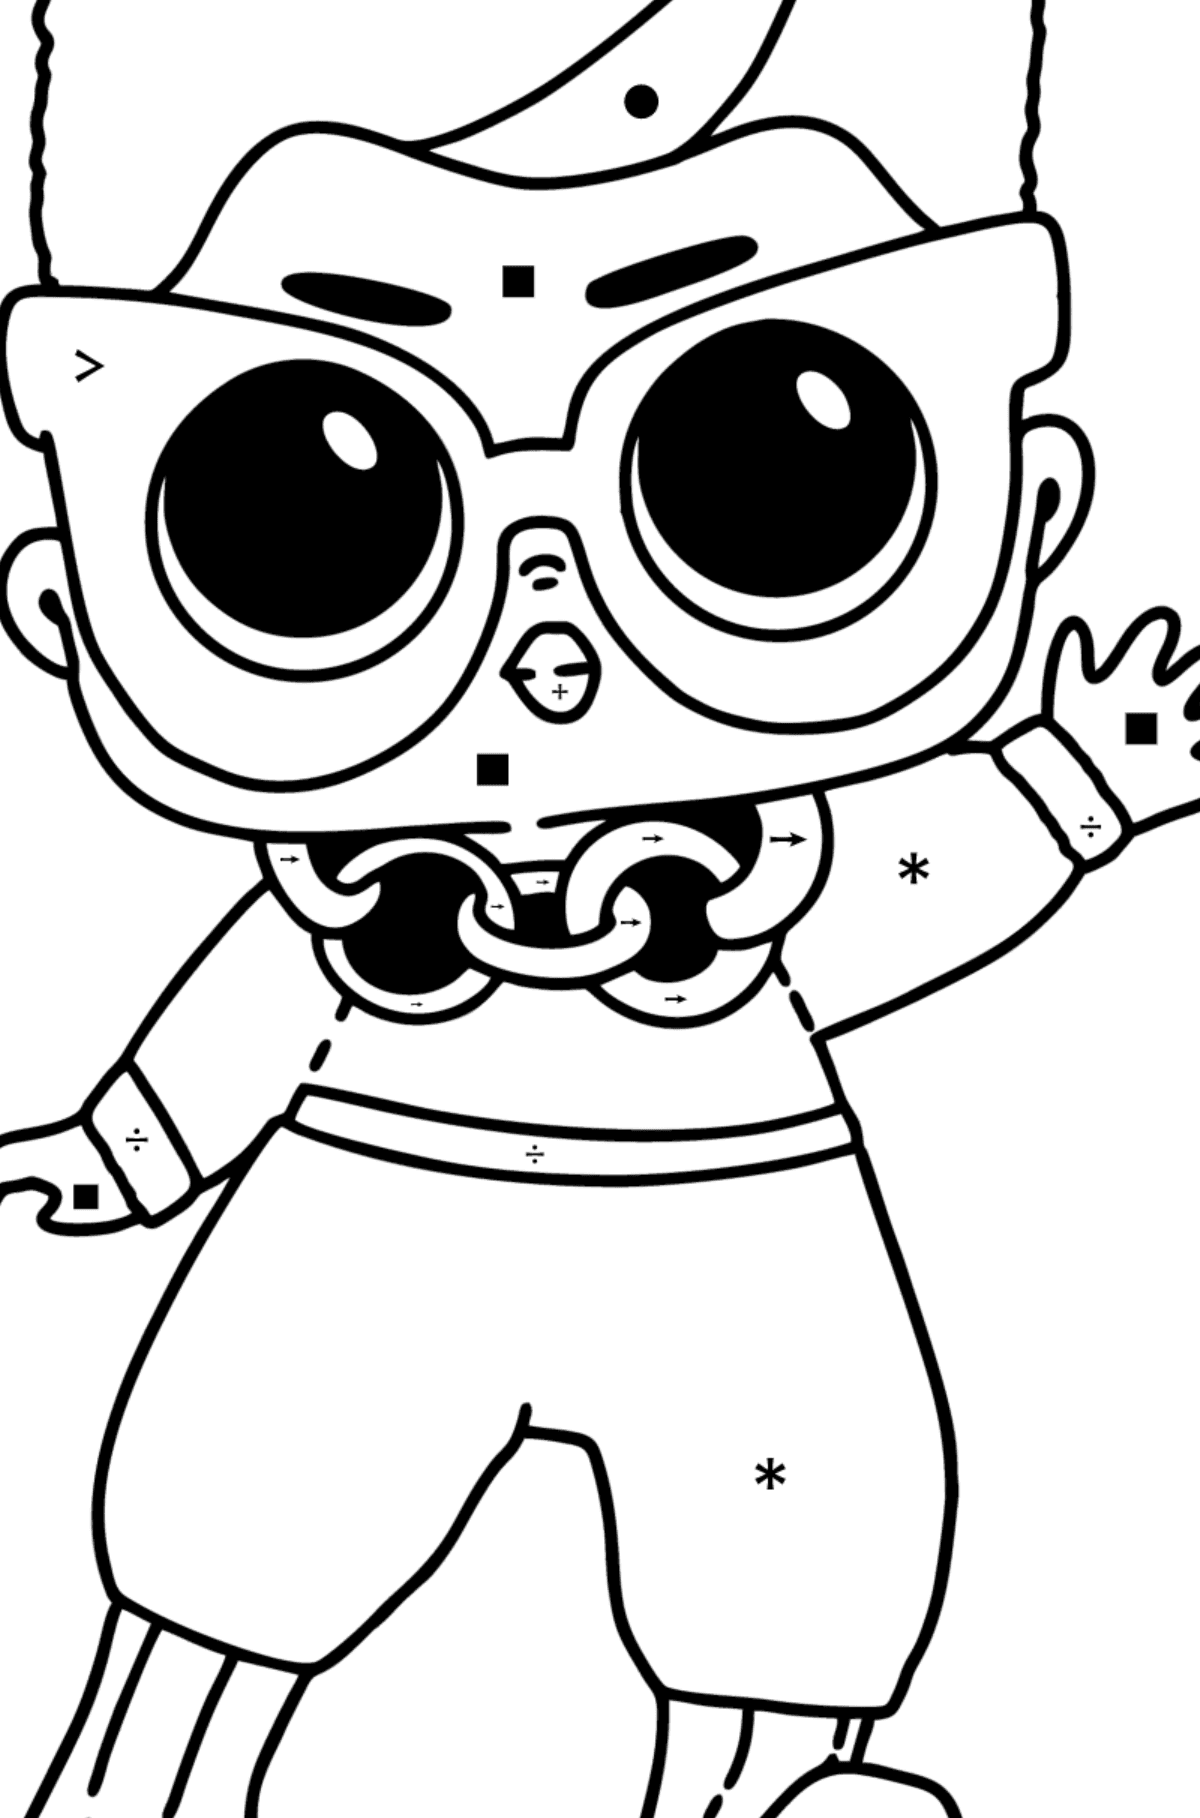 LOL Surprise Swaggie Doll Boy coloring page - Coloring by Symbols for Kids